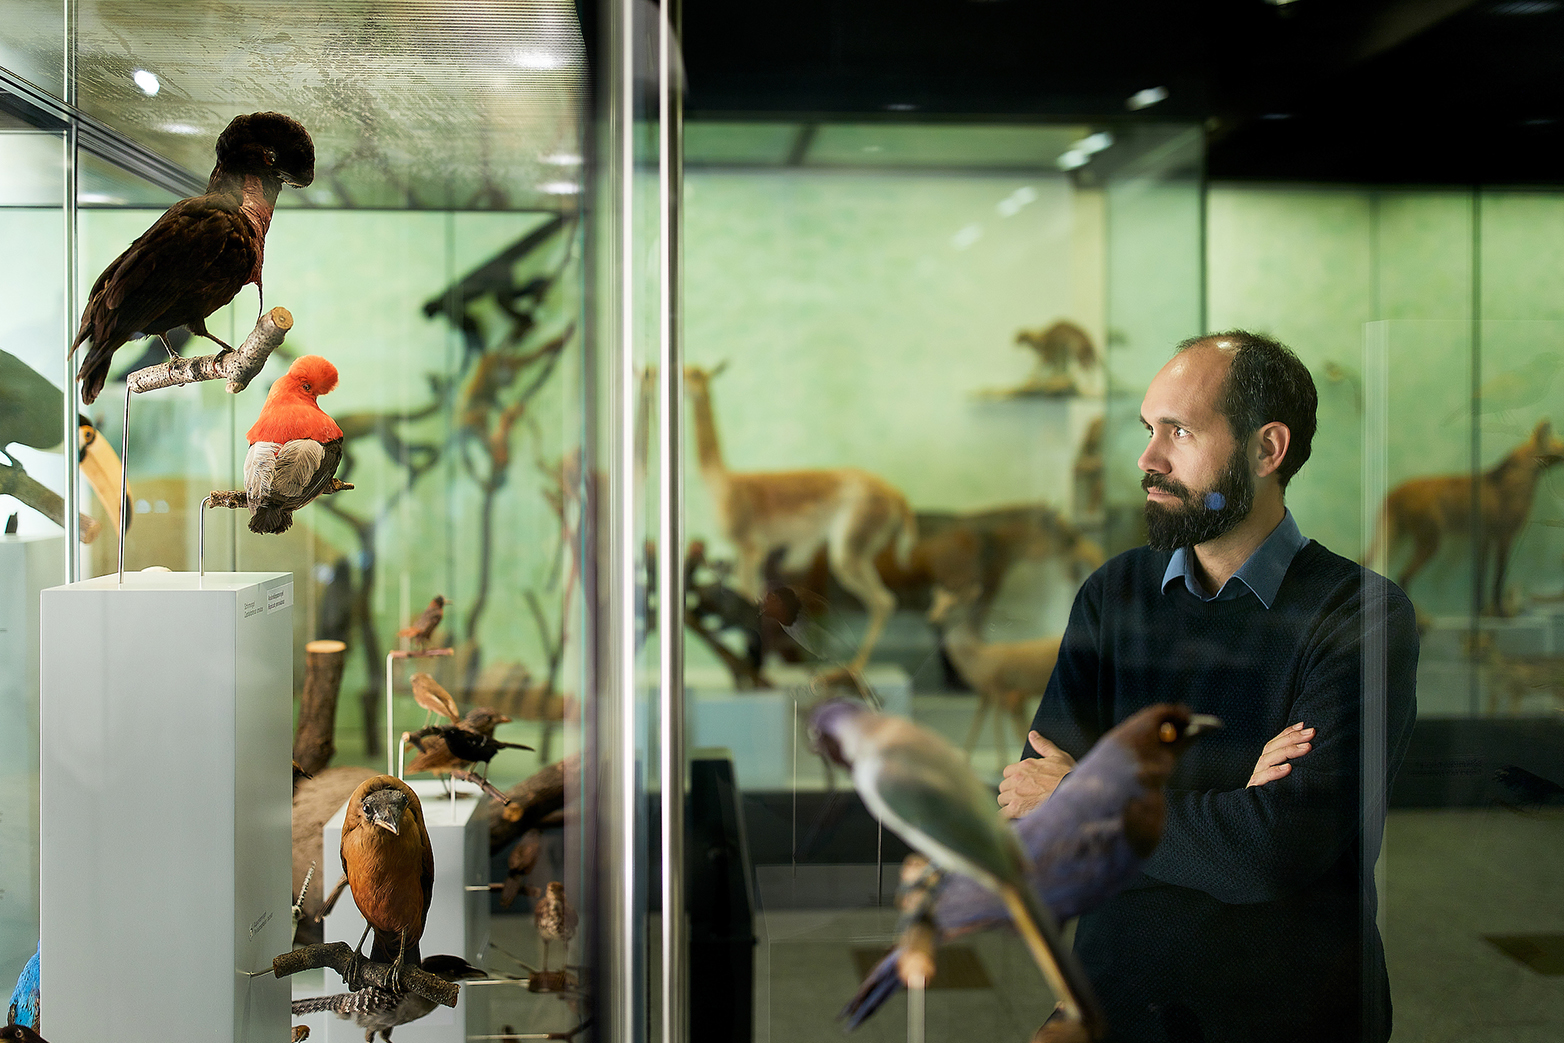 Visit natural science collections to get on the trail of a Swiss natural scientist: Tomás Bartoletti looks at stuffed birds from South America. (Photo: partners in GmbH - Stefan Weiss)